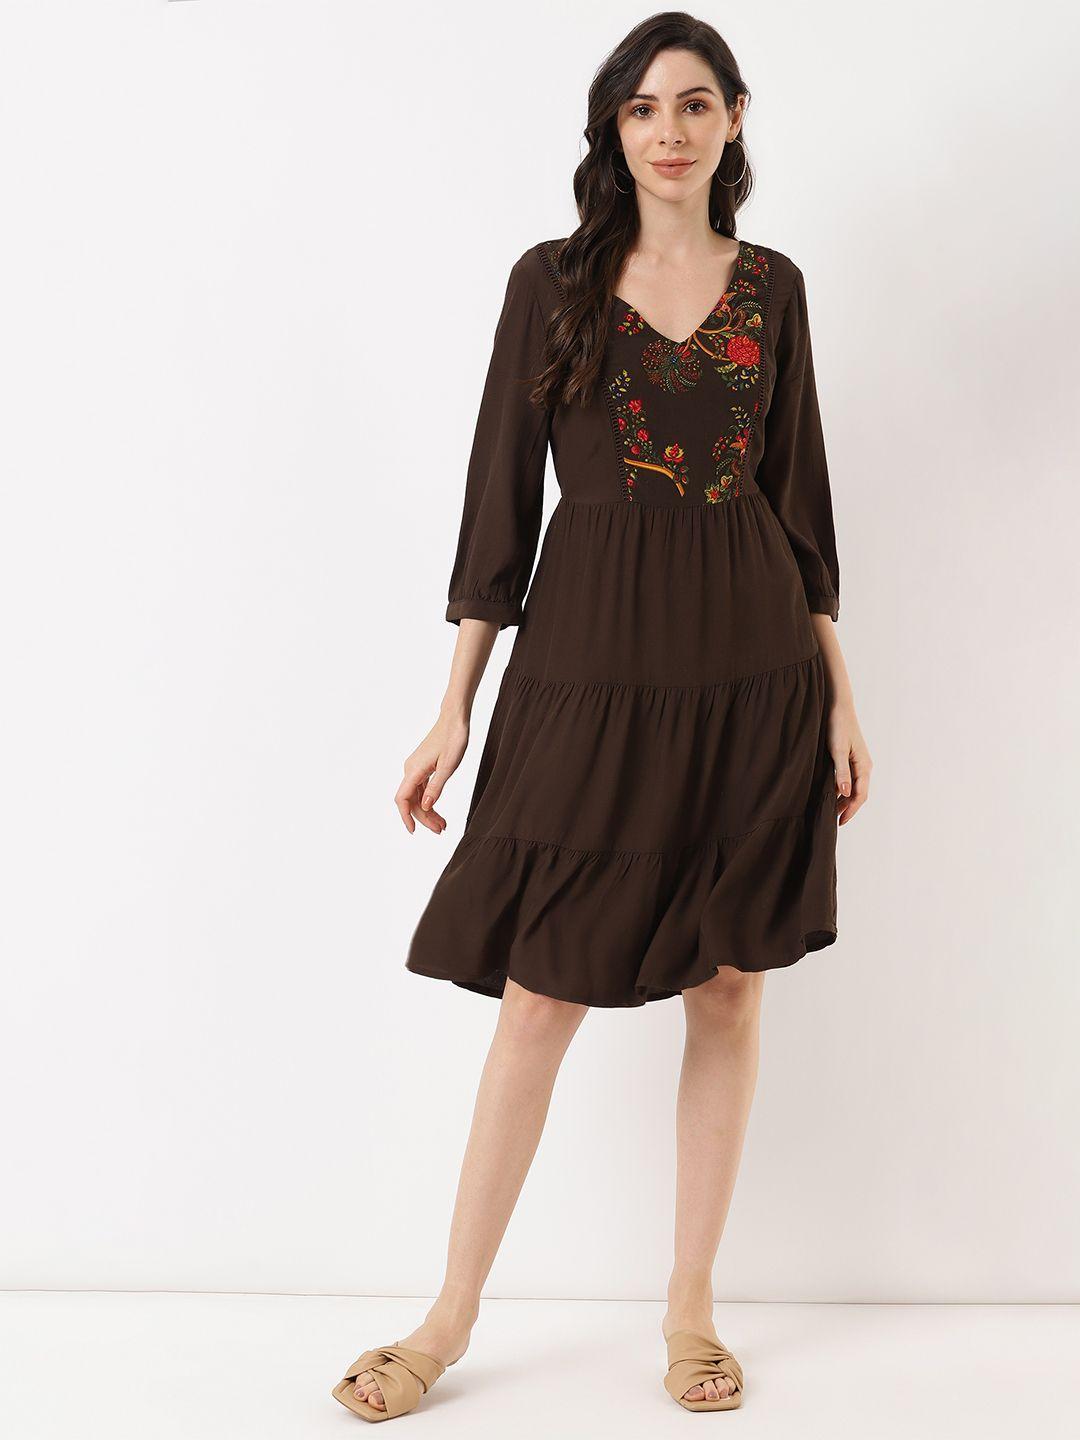 marks & spencer brown floral embroidered maxi dress